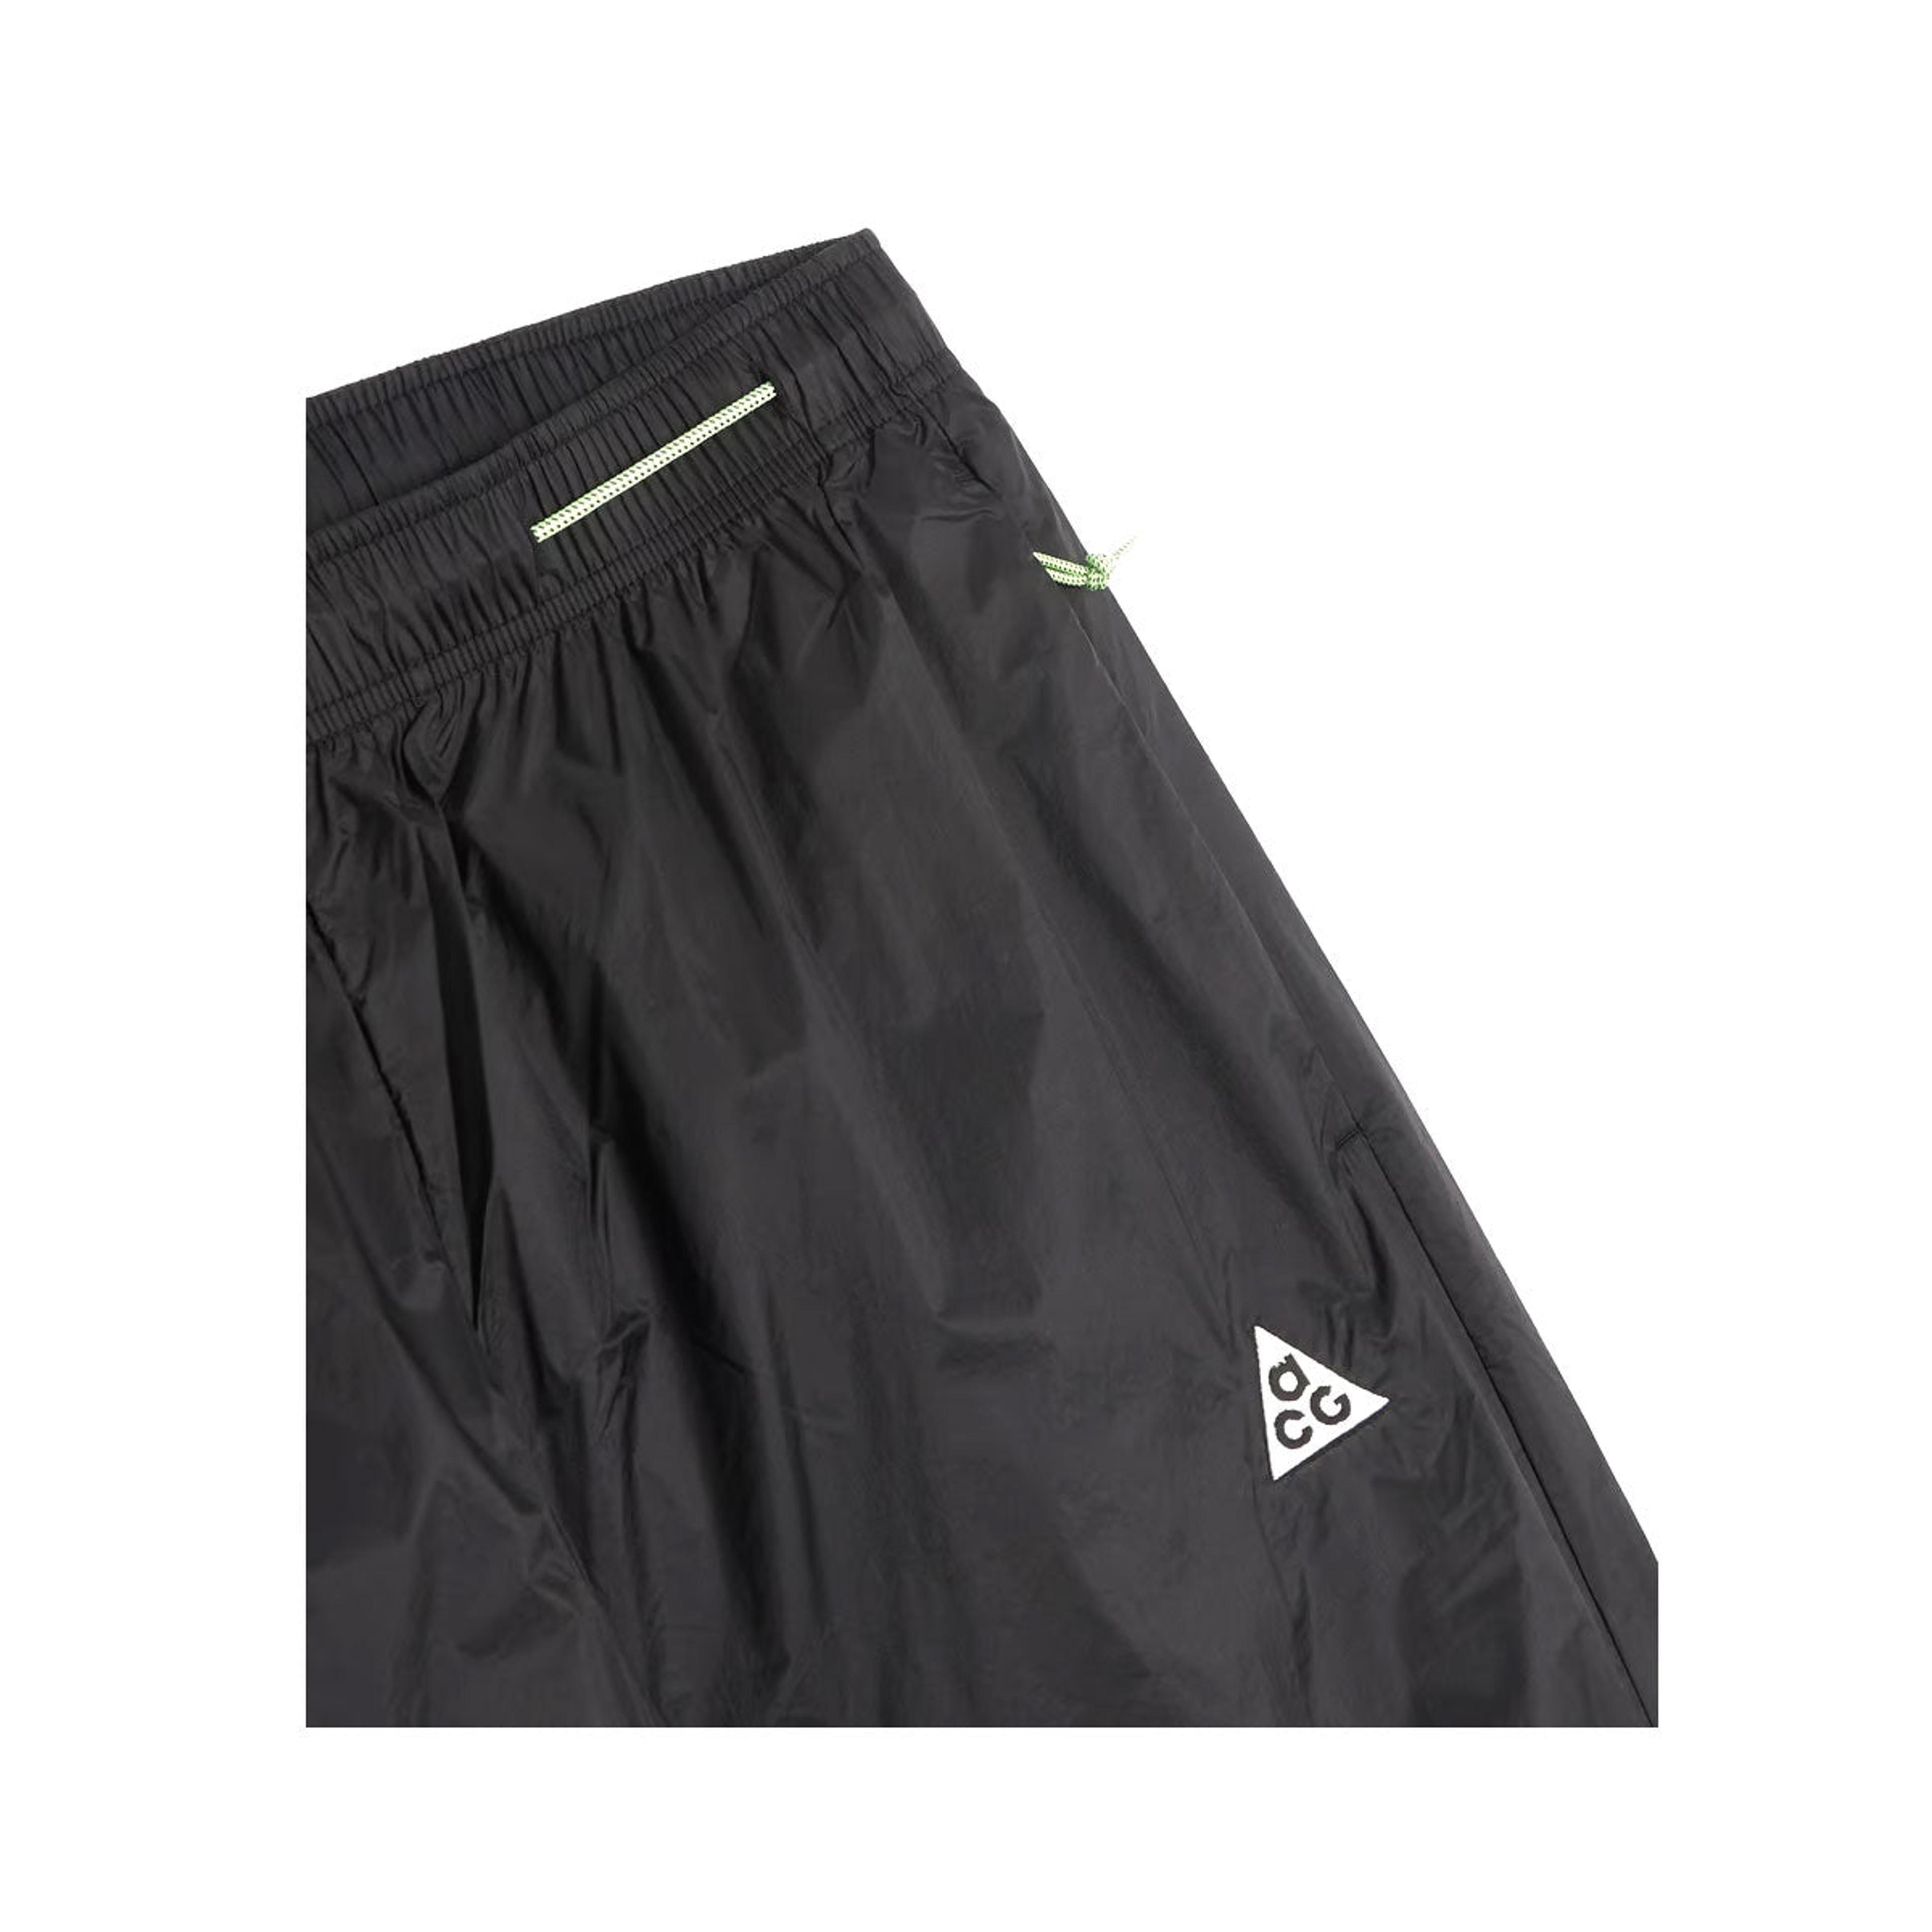 Alternate View 4 of Nike Men's ACG "Cinder Cone" Windshell Trousers